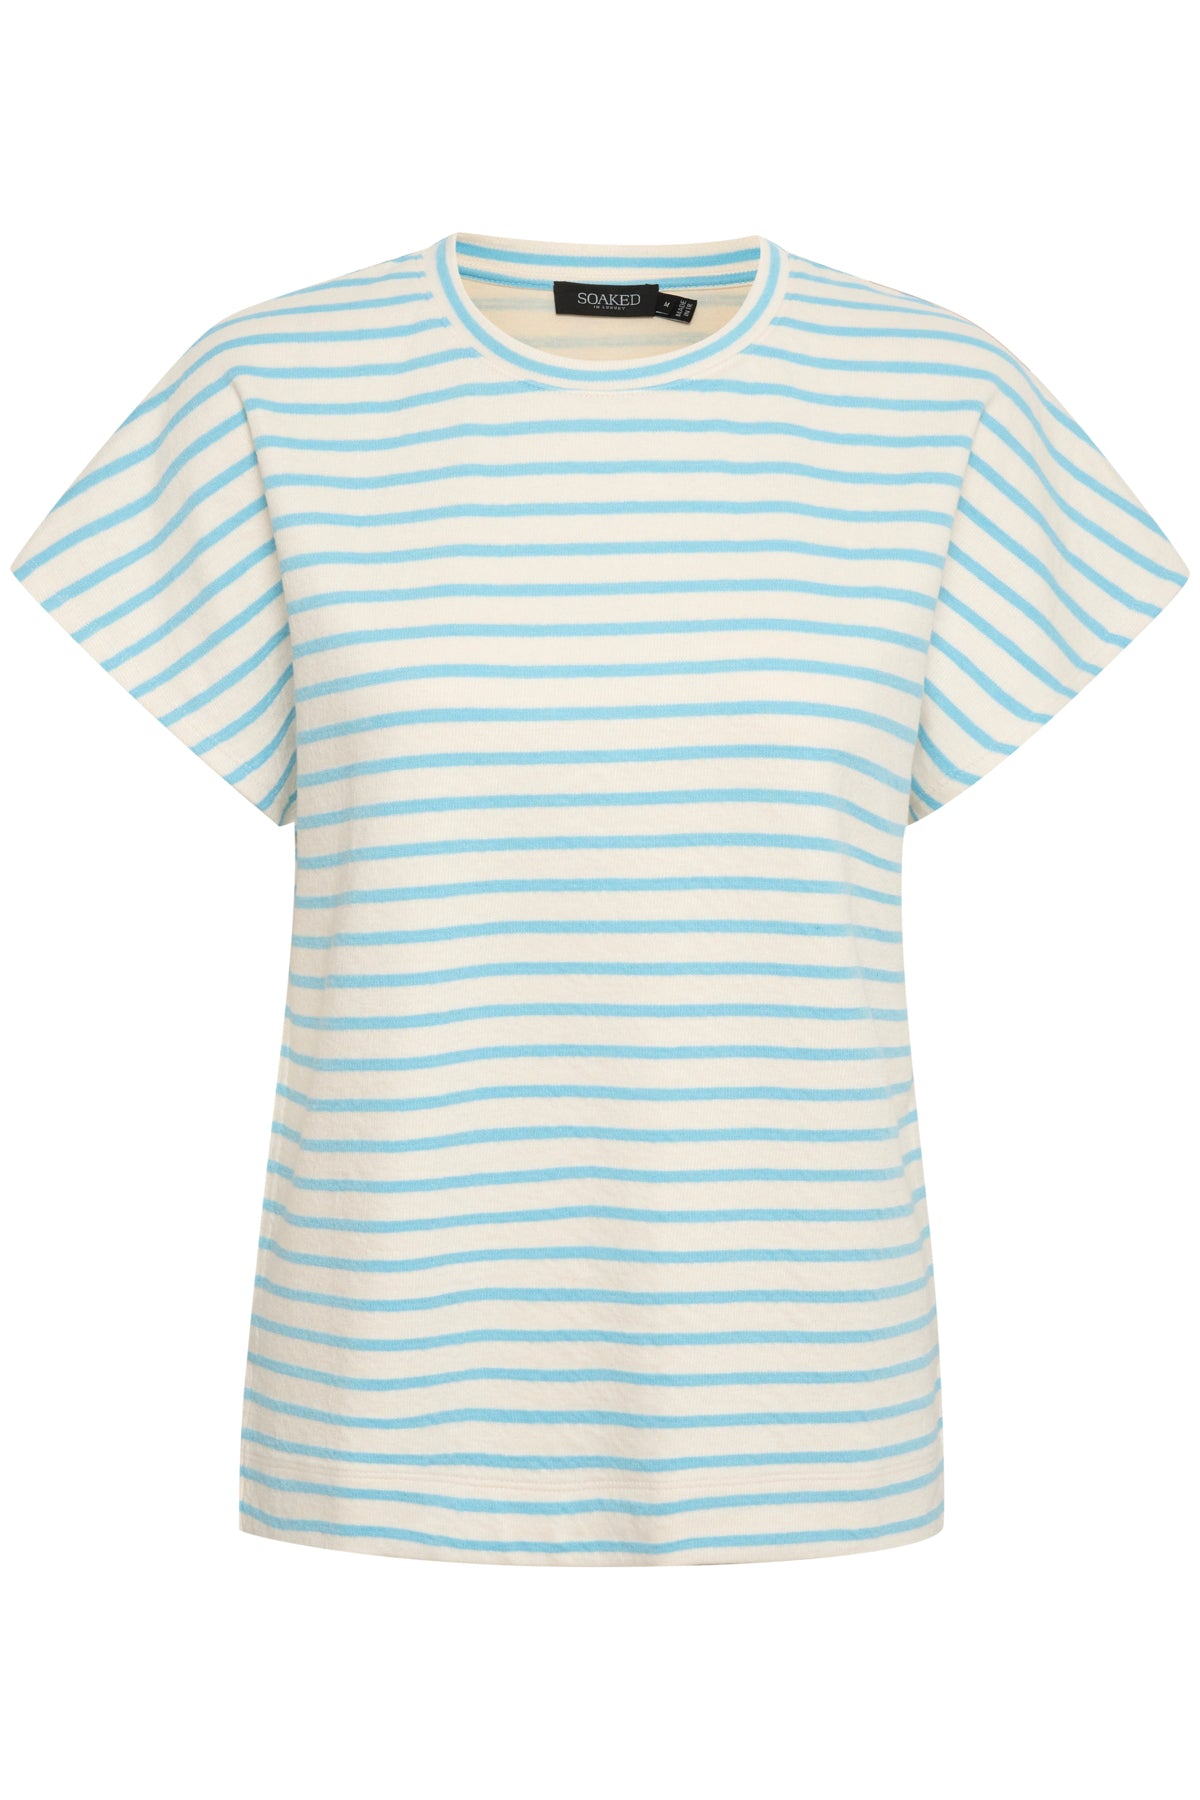 White Ingeline tee with blue stripes